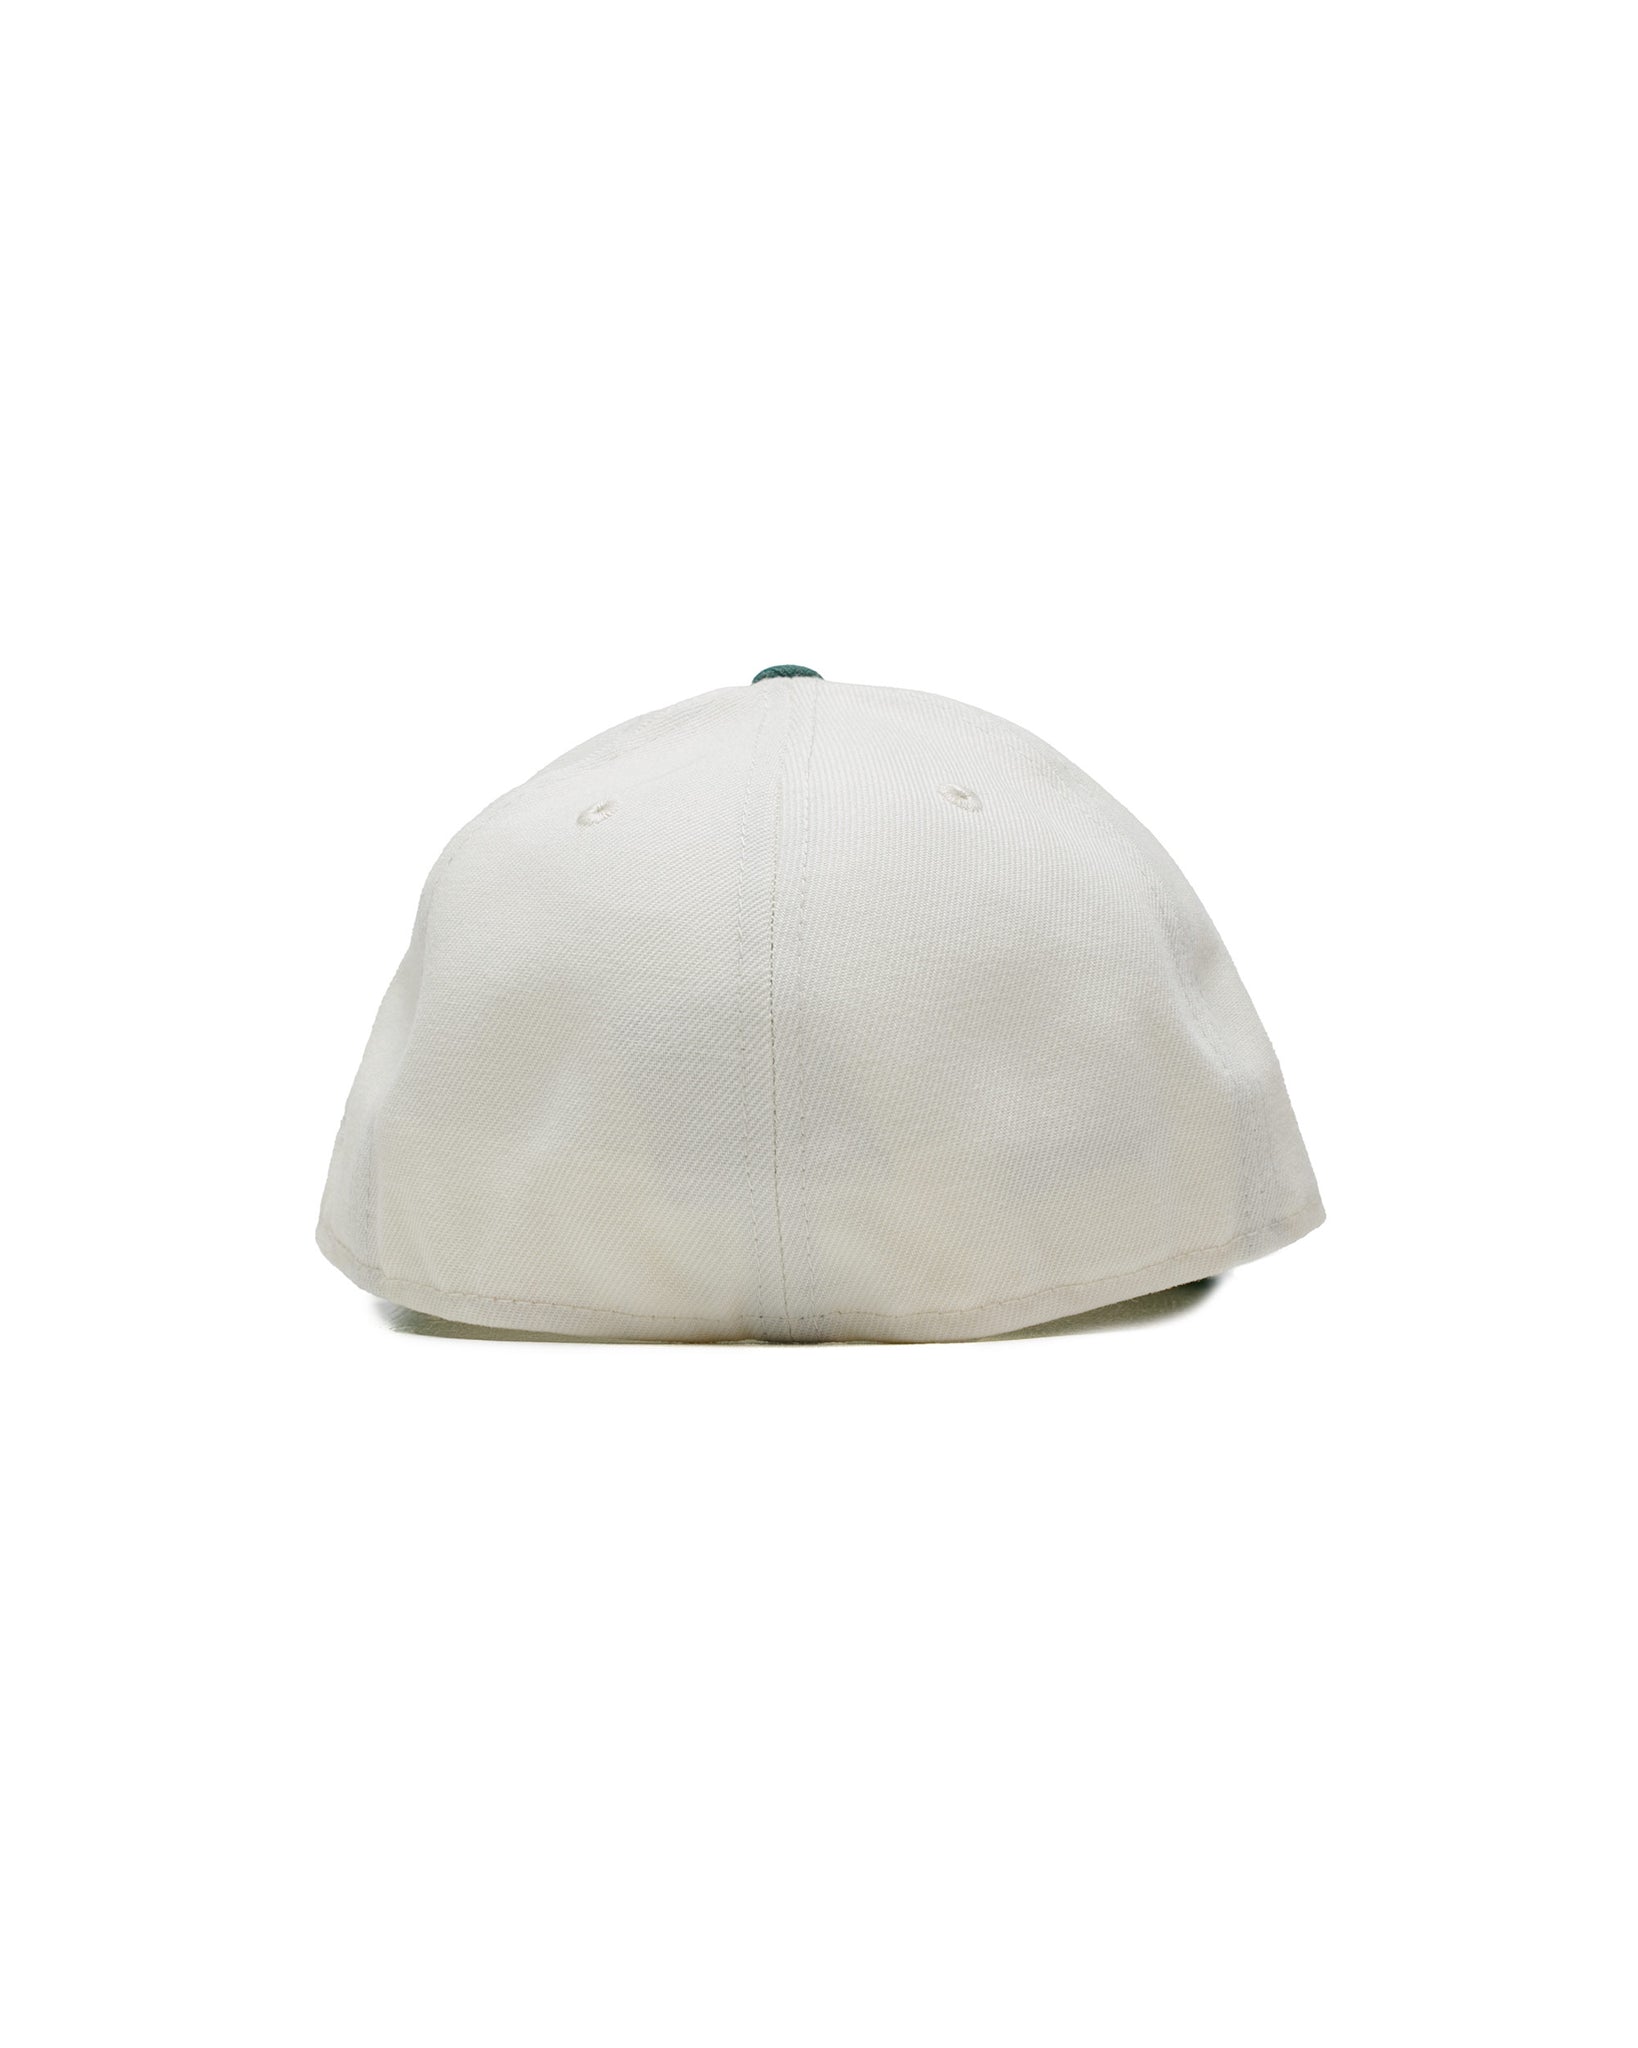 Lost & Found x New Era Low Profile 59FIFTY Cap WhiteGreen back